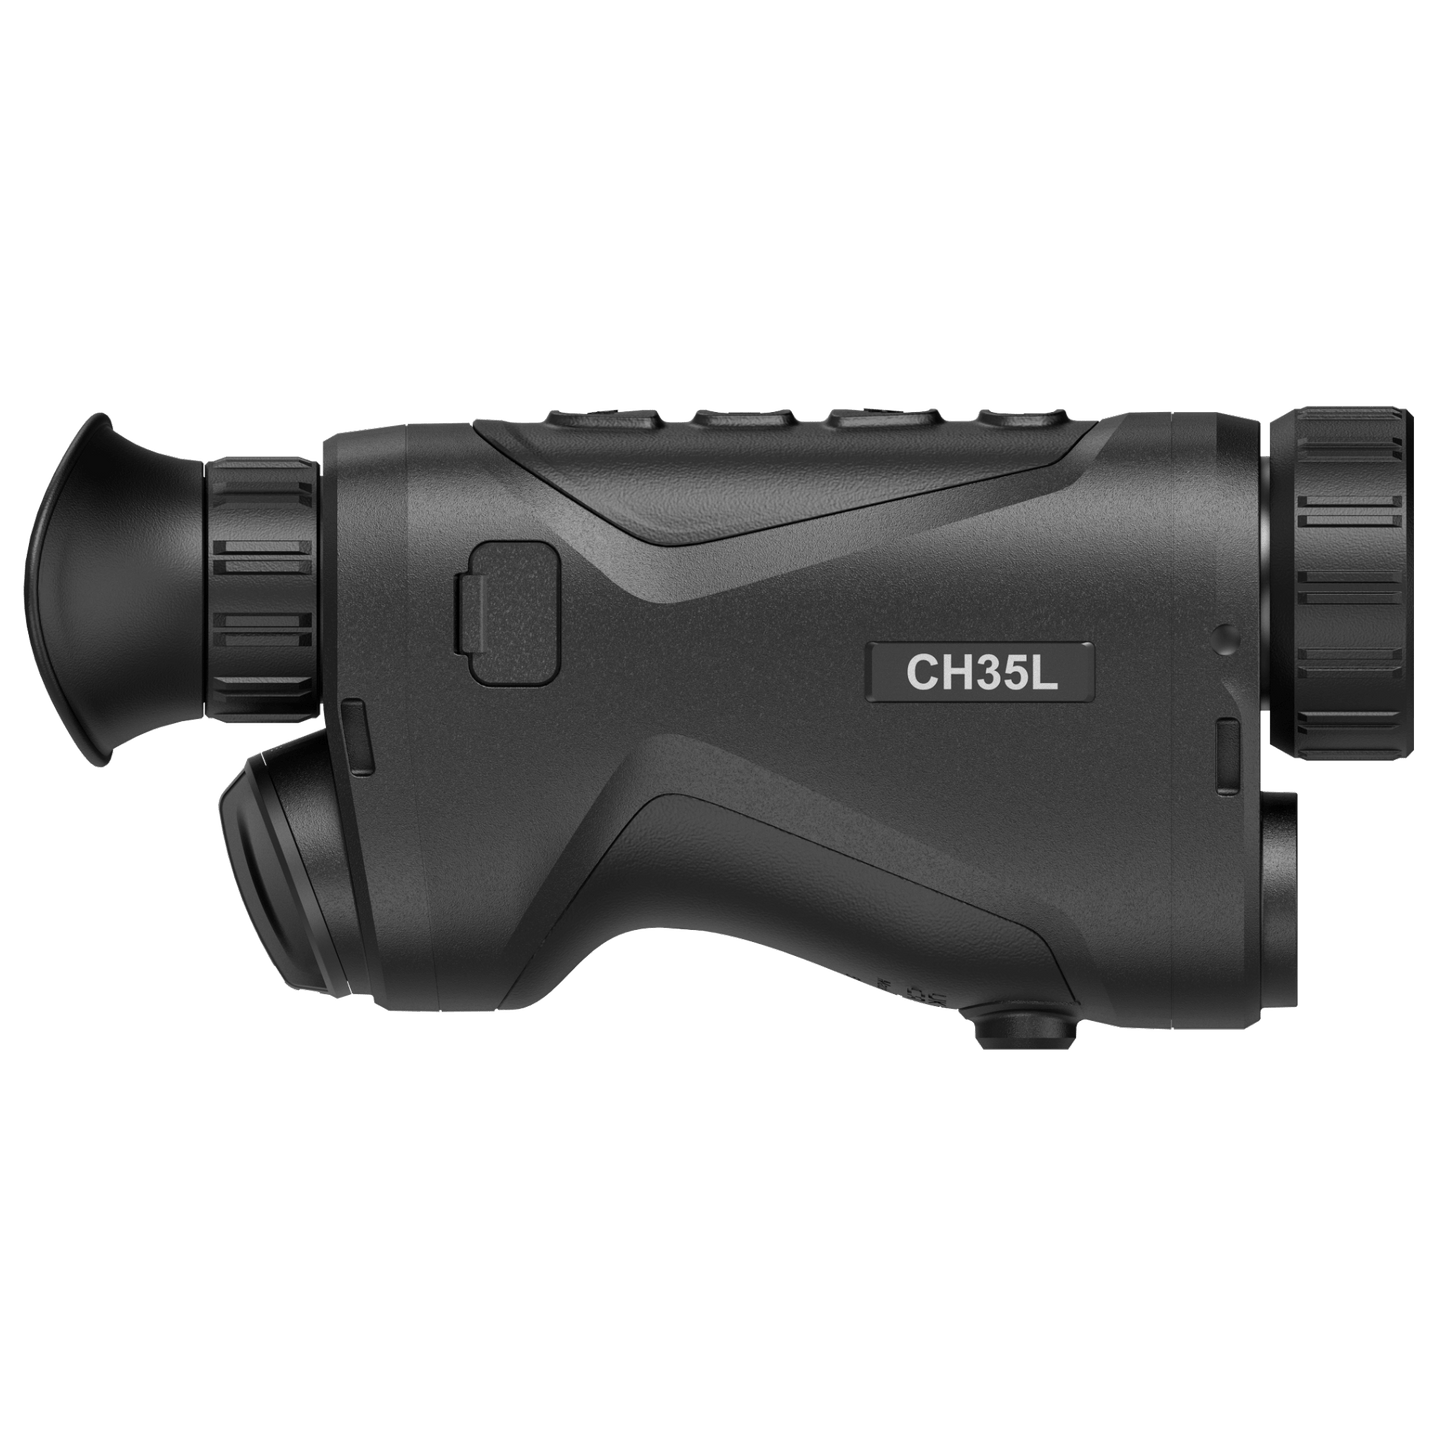 Side view of HikMicro Condor CH35L Thermal Monocular showcasing its ergonomic design, model label, and focus adjustments. Ideal for precision thermal imaging in hunting, surveillance, and outdoor exploration.